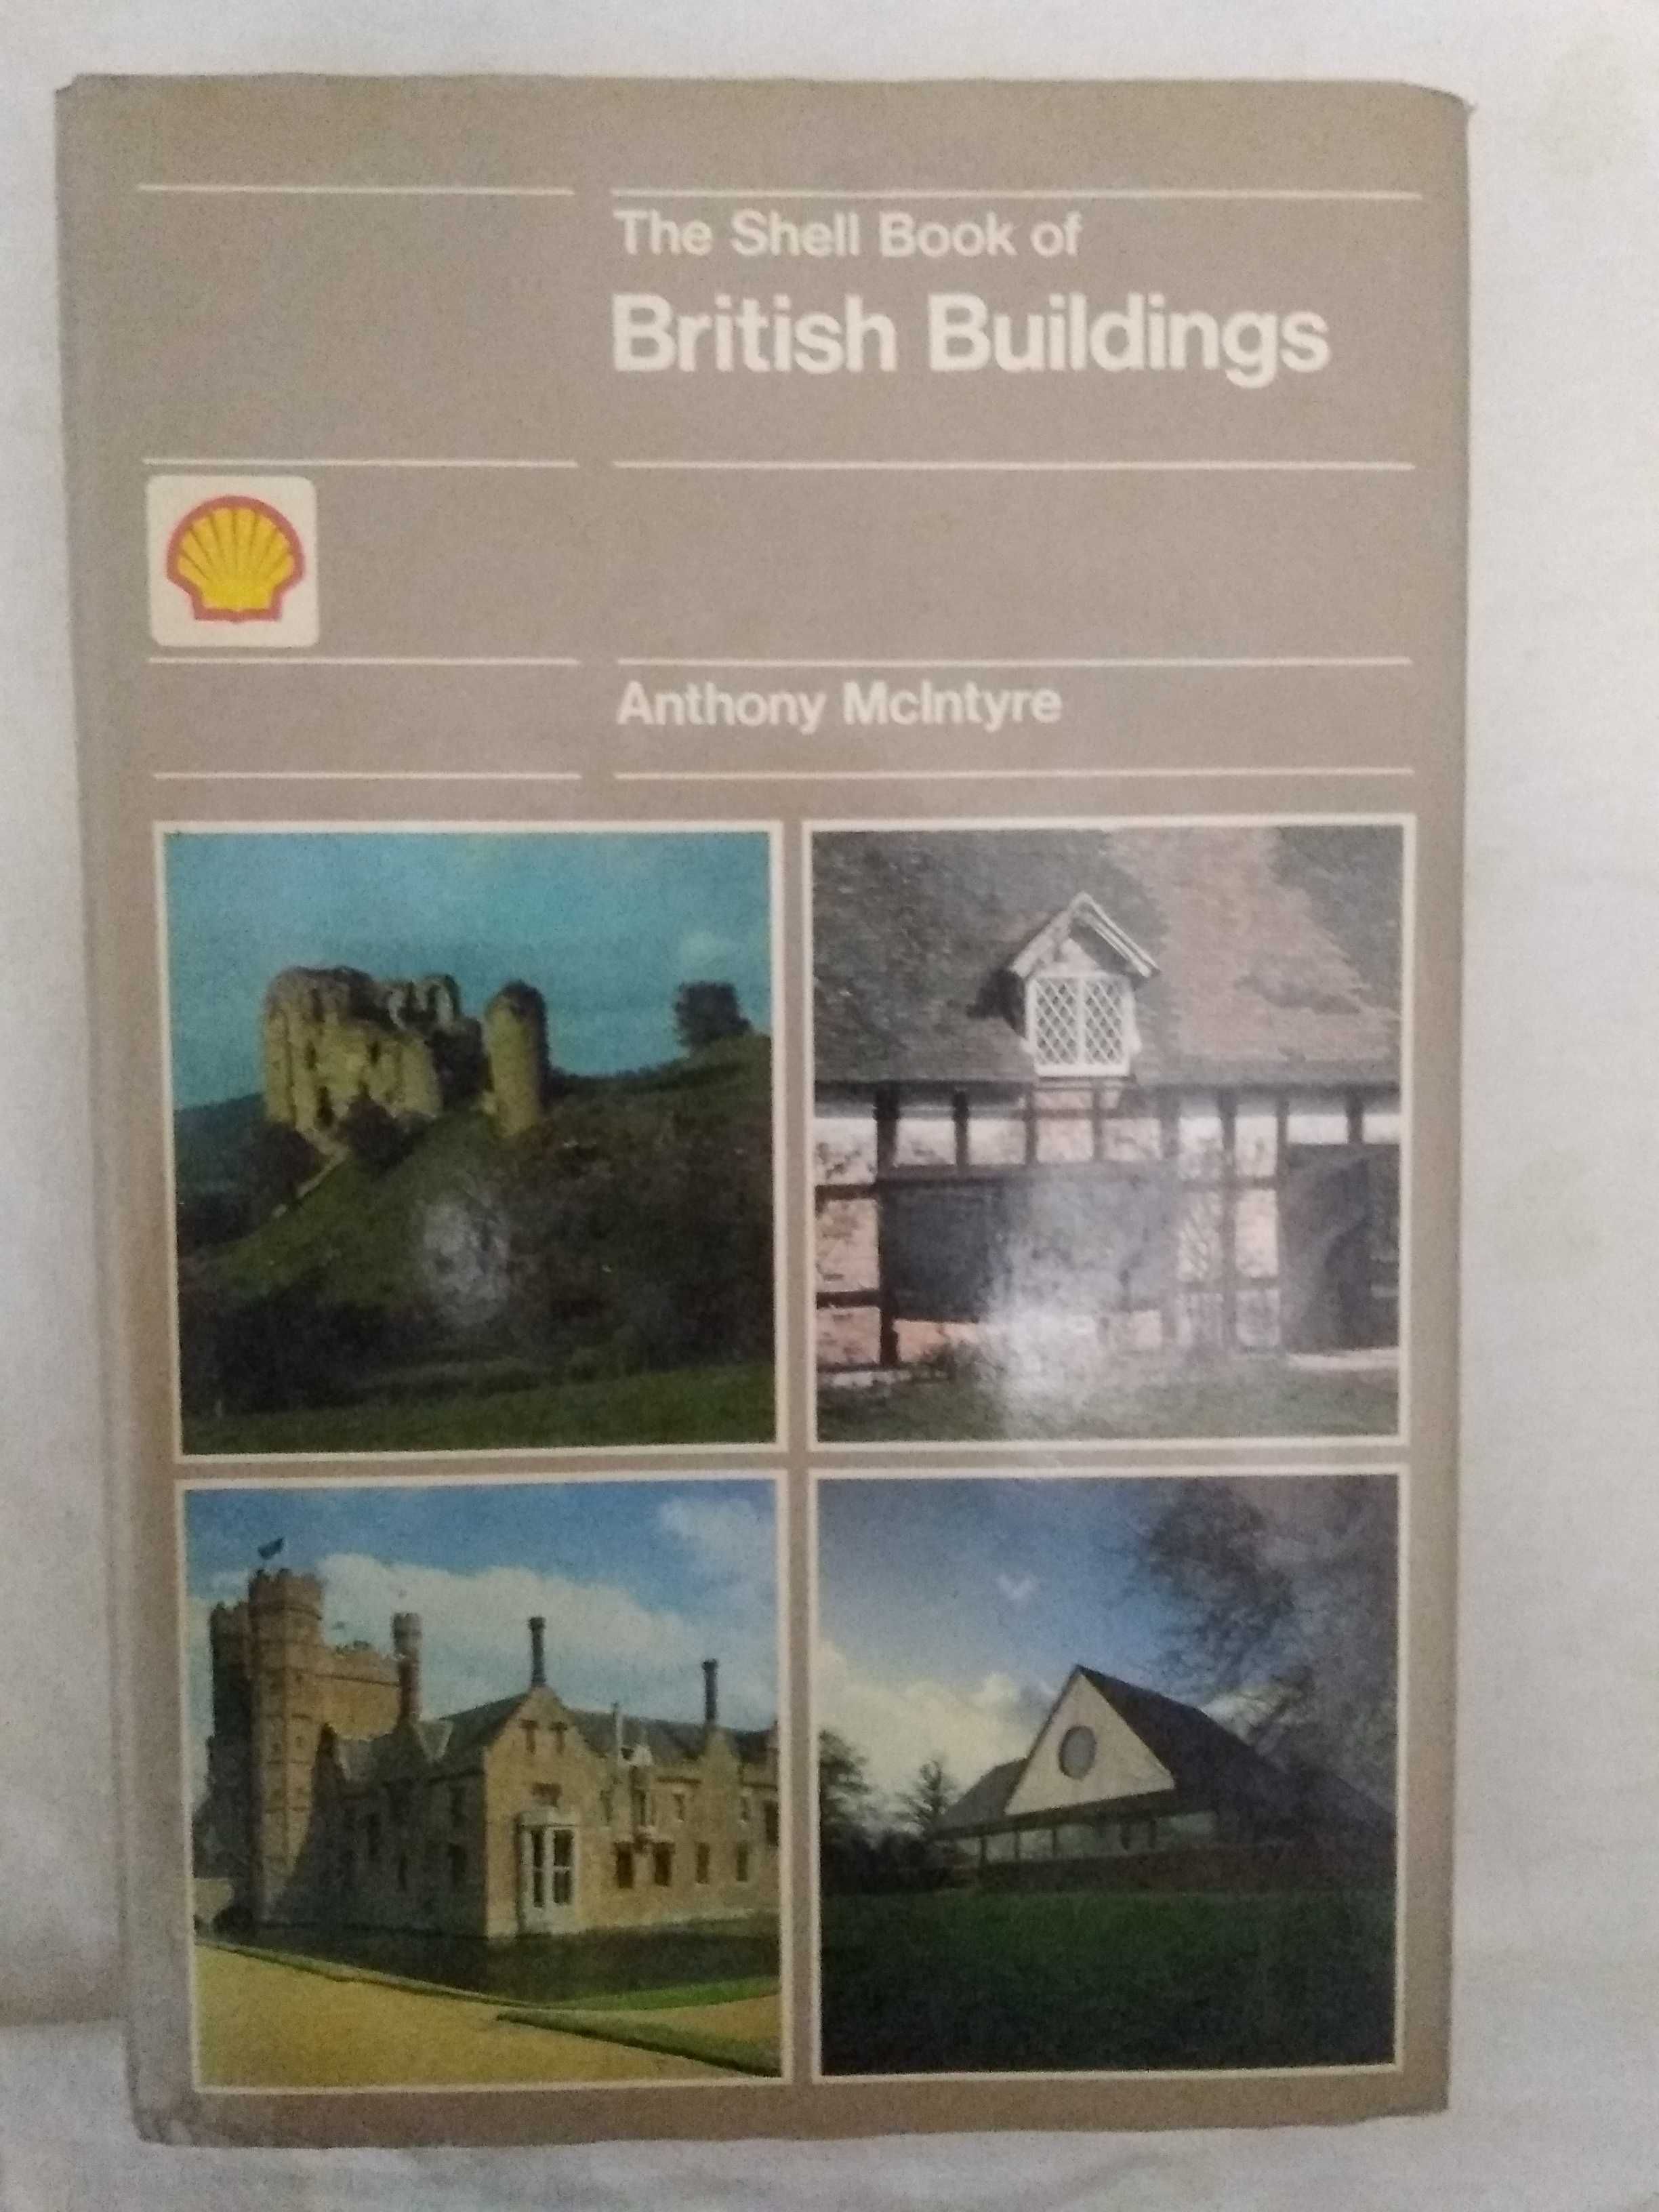 The Shell Book of British Buildings
by McIntyre, Anthony 1984